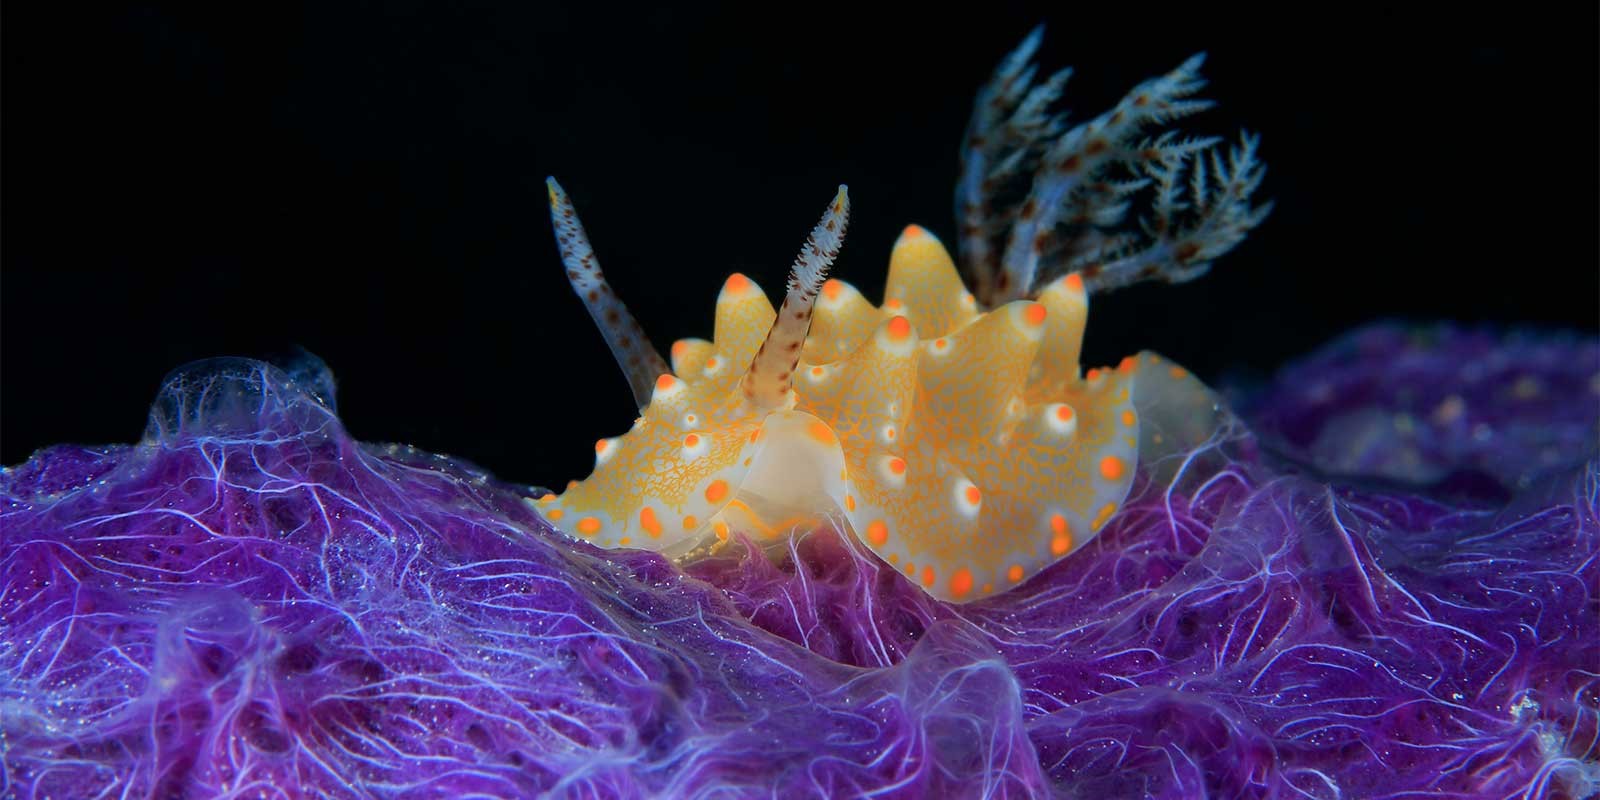 Nudibranch in the Philippines